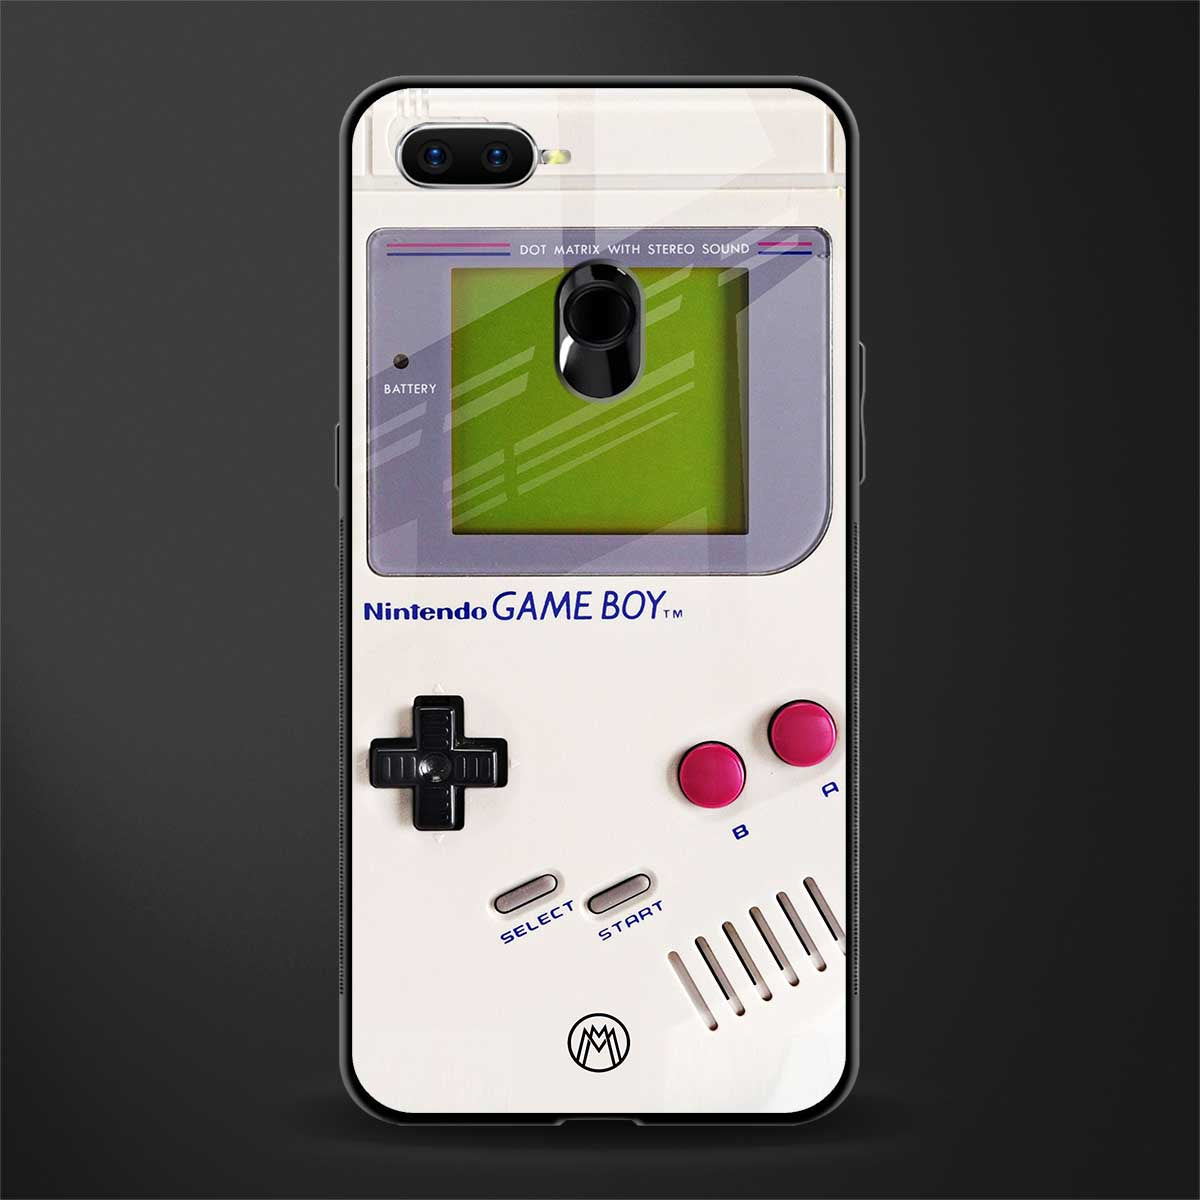 gameboy classic glass case for realme 2 pro image